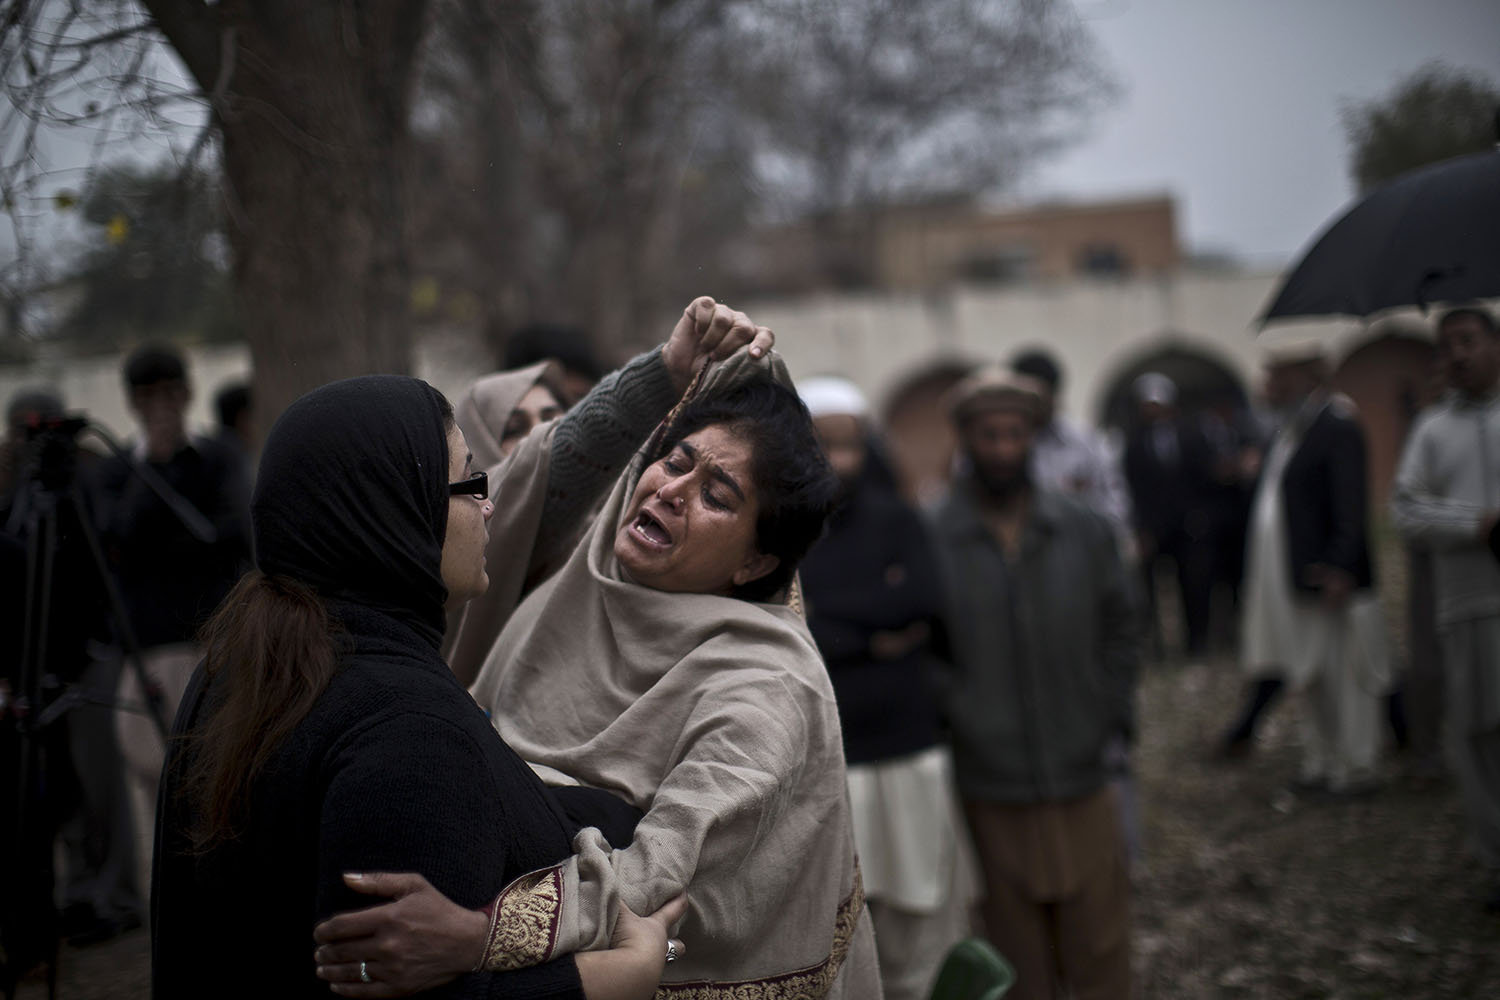 Mar. 3, 2014. A woman grieves outside a hospital's morgue for victims of a twin suicide bombing in Islamabad, Pakistan.